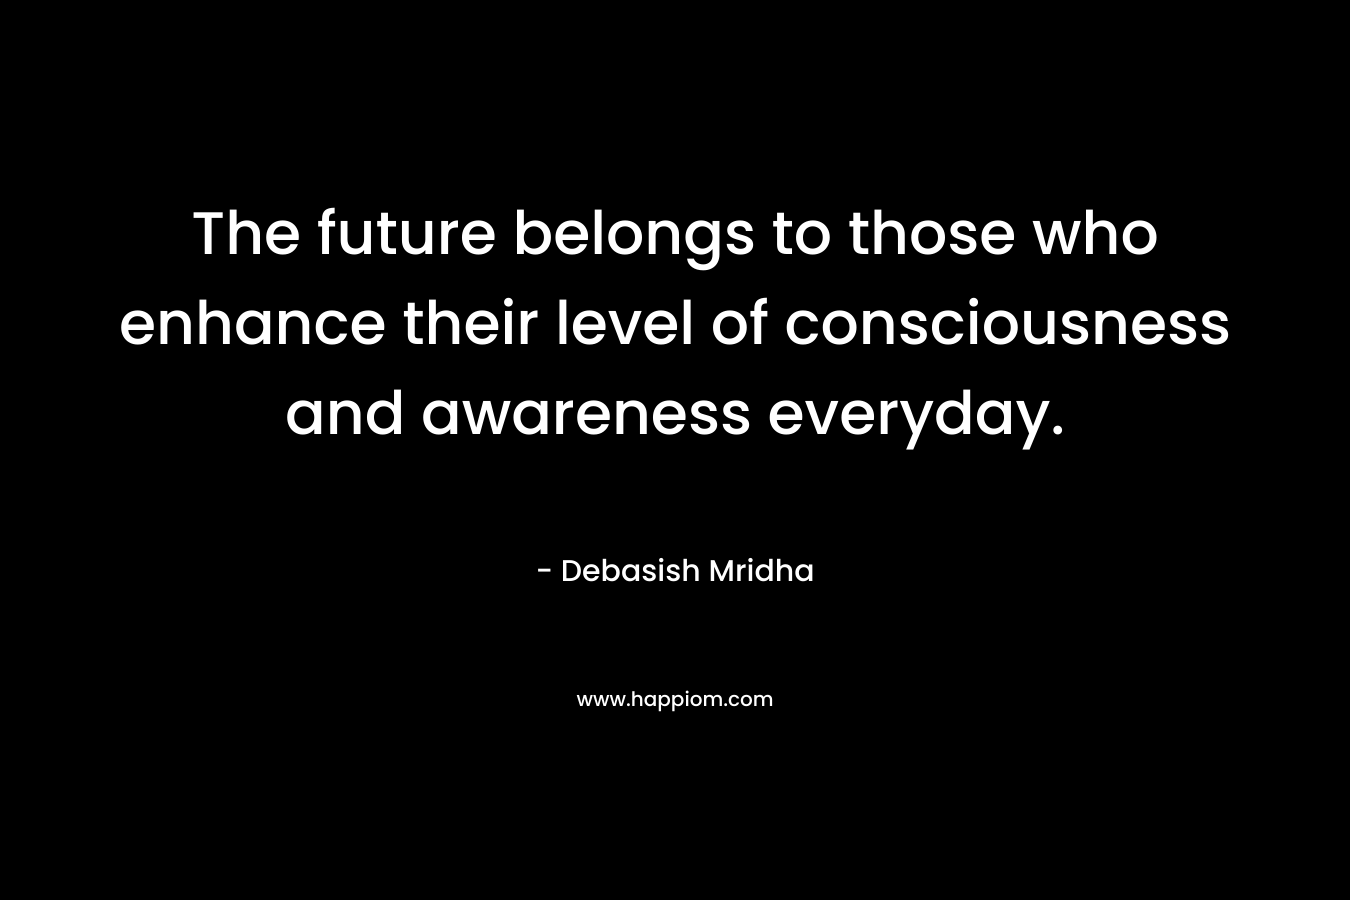 The future belongs to those who enhance their level of consciousness and awareness everyday.